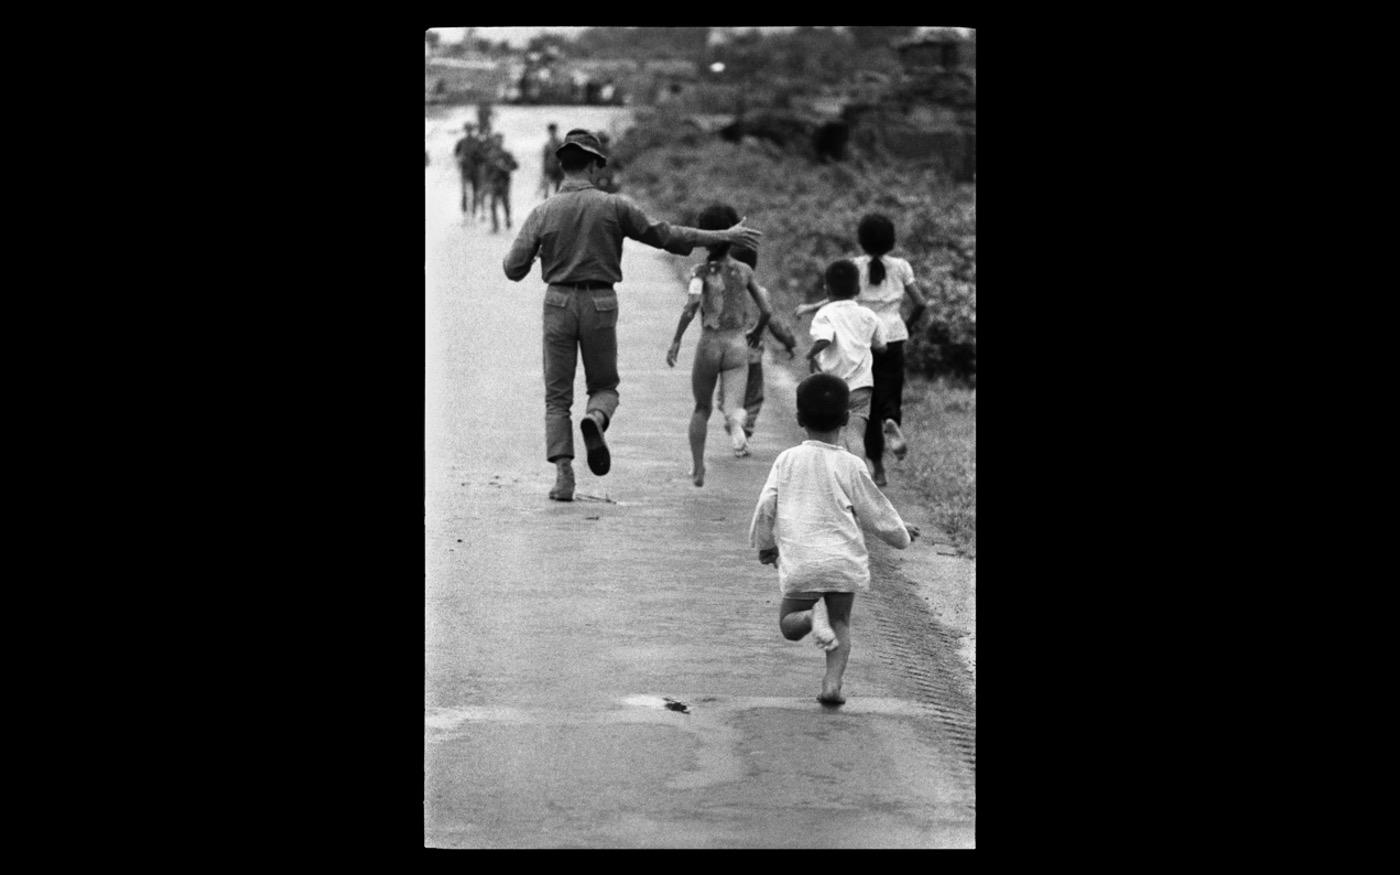 A group of Vietnamese children, mistakenly burned by a napalm bomb (the oldest girl was to become famous in Nick Ut's "napalm girl" photo  Trang Bang Vietnam 1972 : Looking Back: 60 Years of Photographs : David Burnett | Photographer